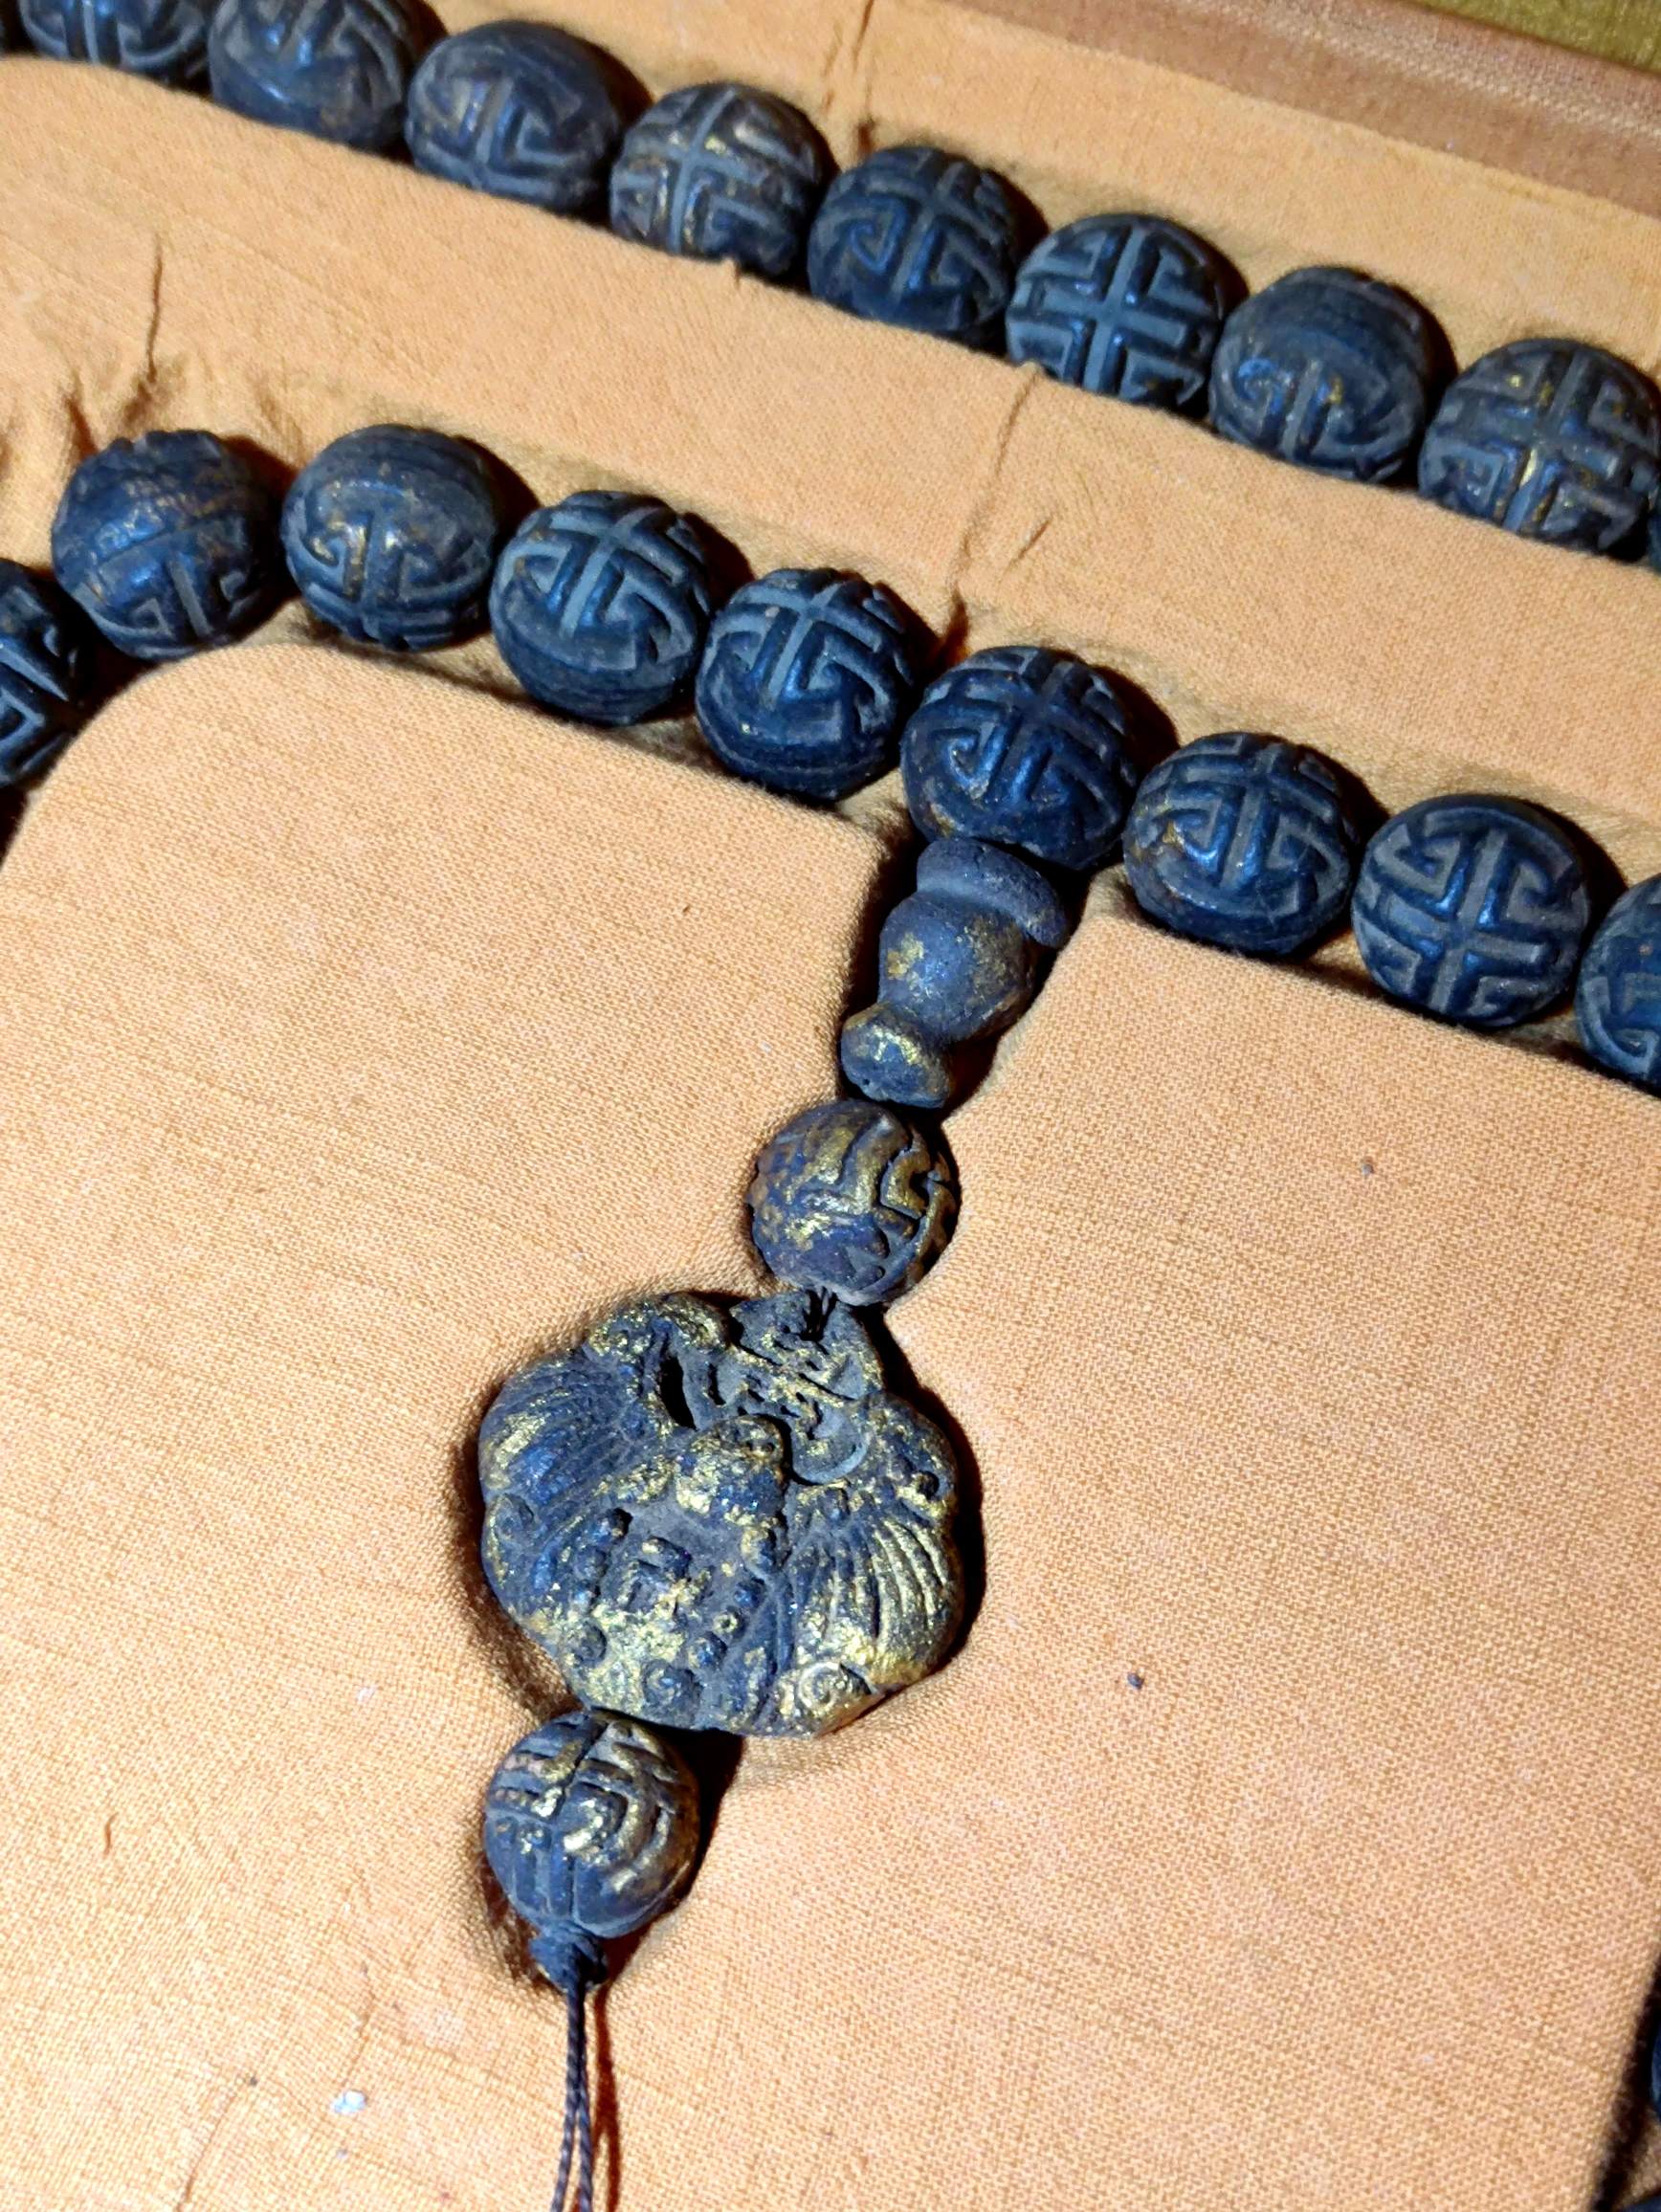 A set of agarwood beads collected by the Qing Palace - Image 5 of 9